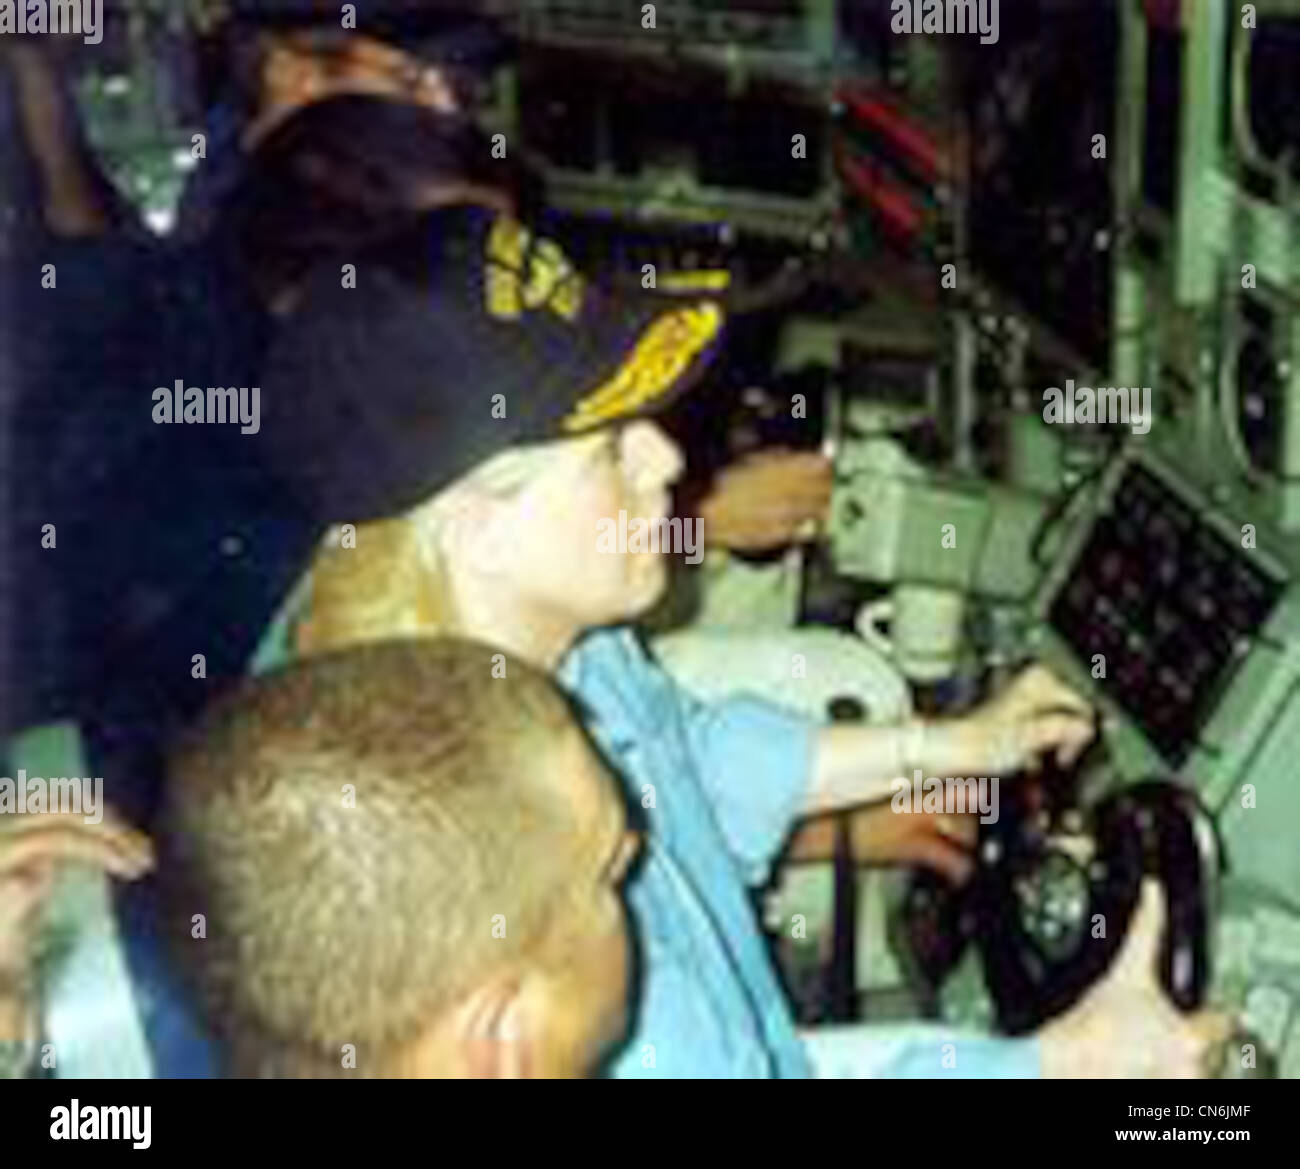 Tipper Gore at the helm of the USS Greeneville during a 'VIP' visit in 1999. Stars and Stripes, Feb 9, 2003 Stock Photo